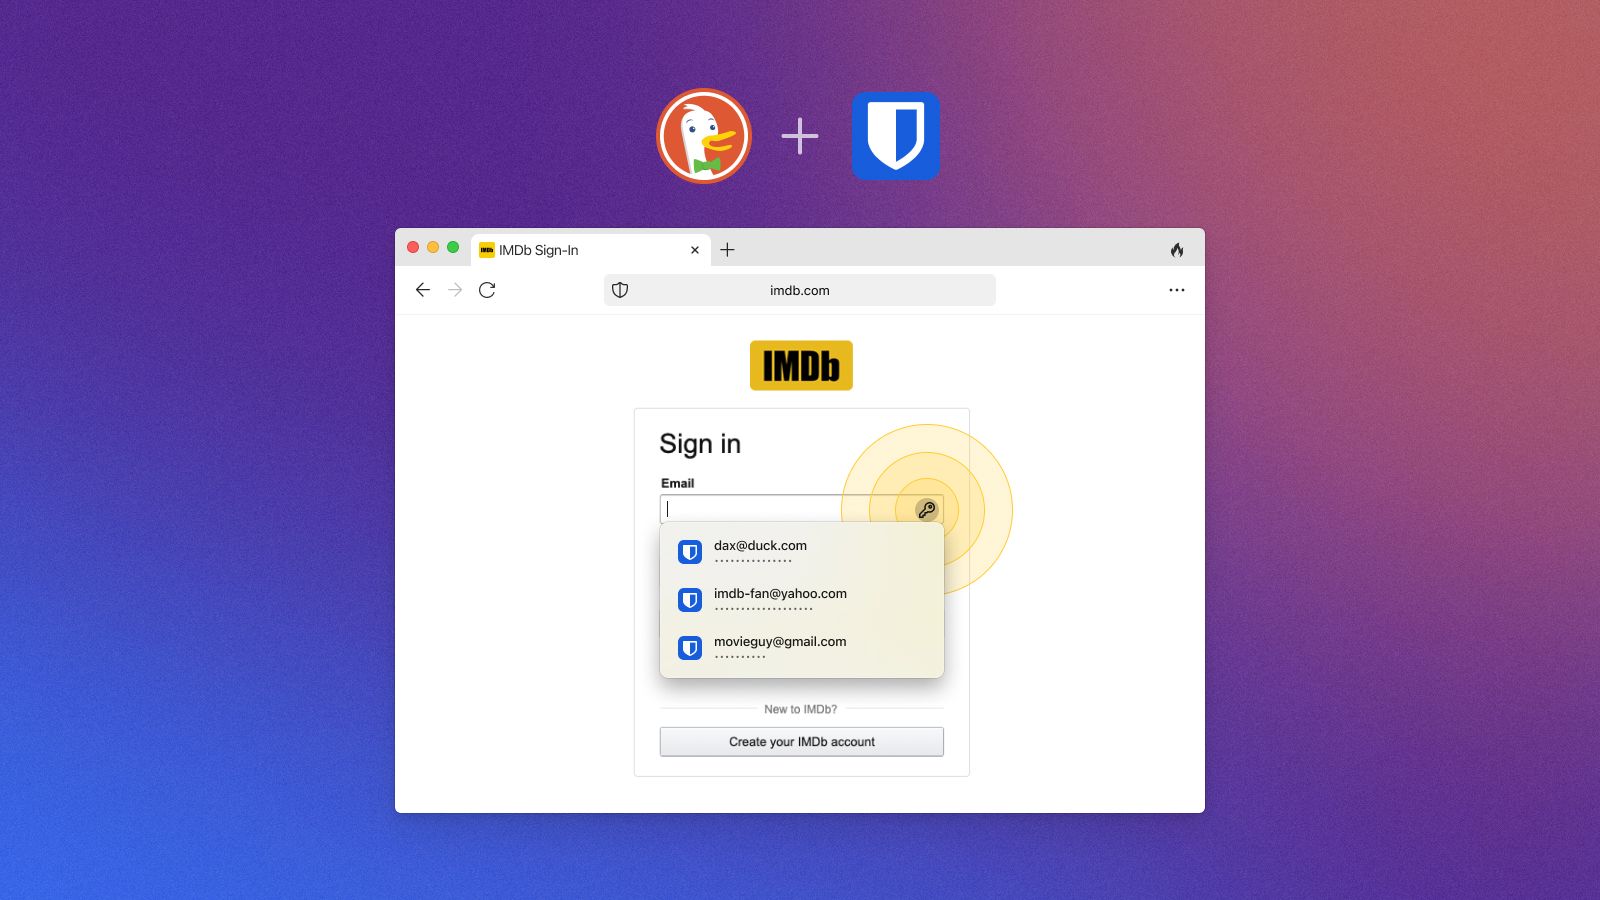 DuckDuckGo and Bitwarden logos over a screenshot of IMDB's login page on a purple background